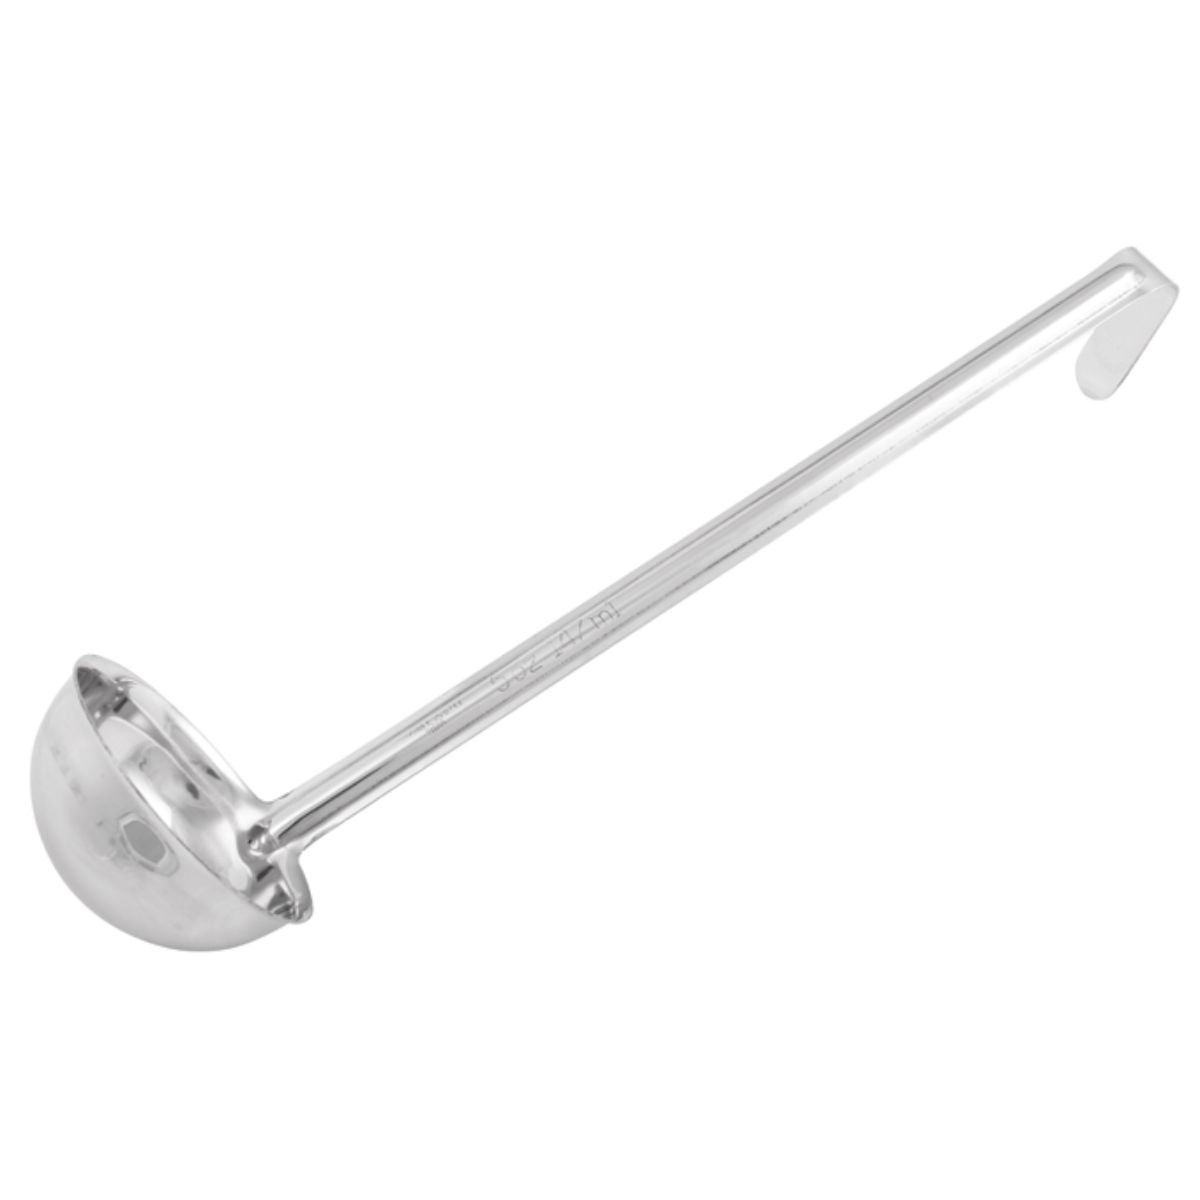 Winco 5oz Stainless Steel Ladle